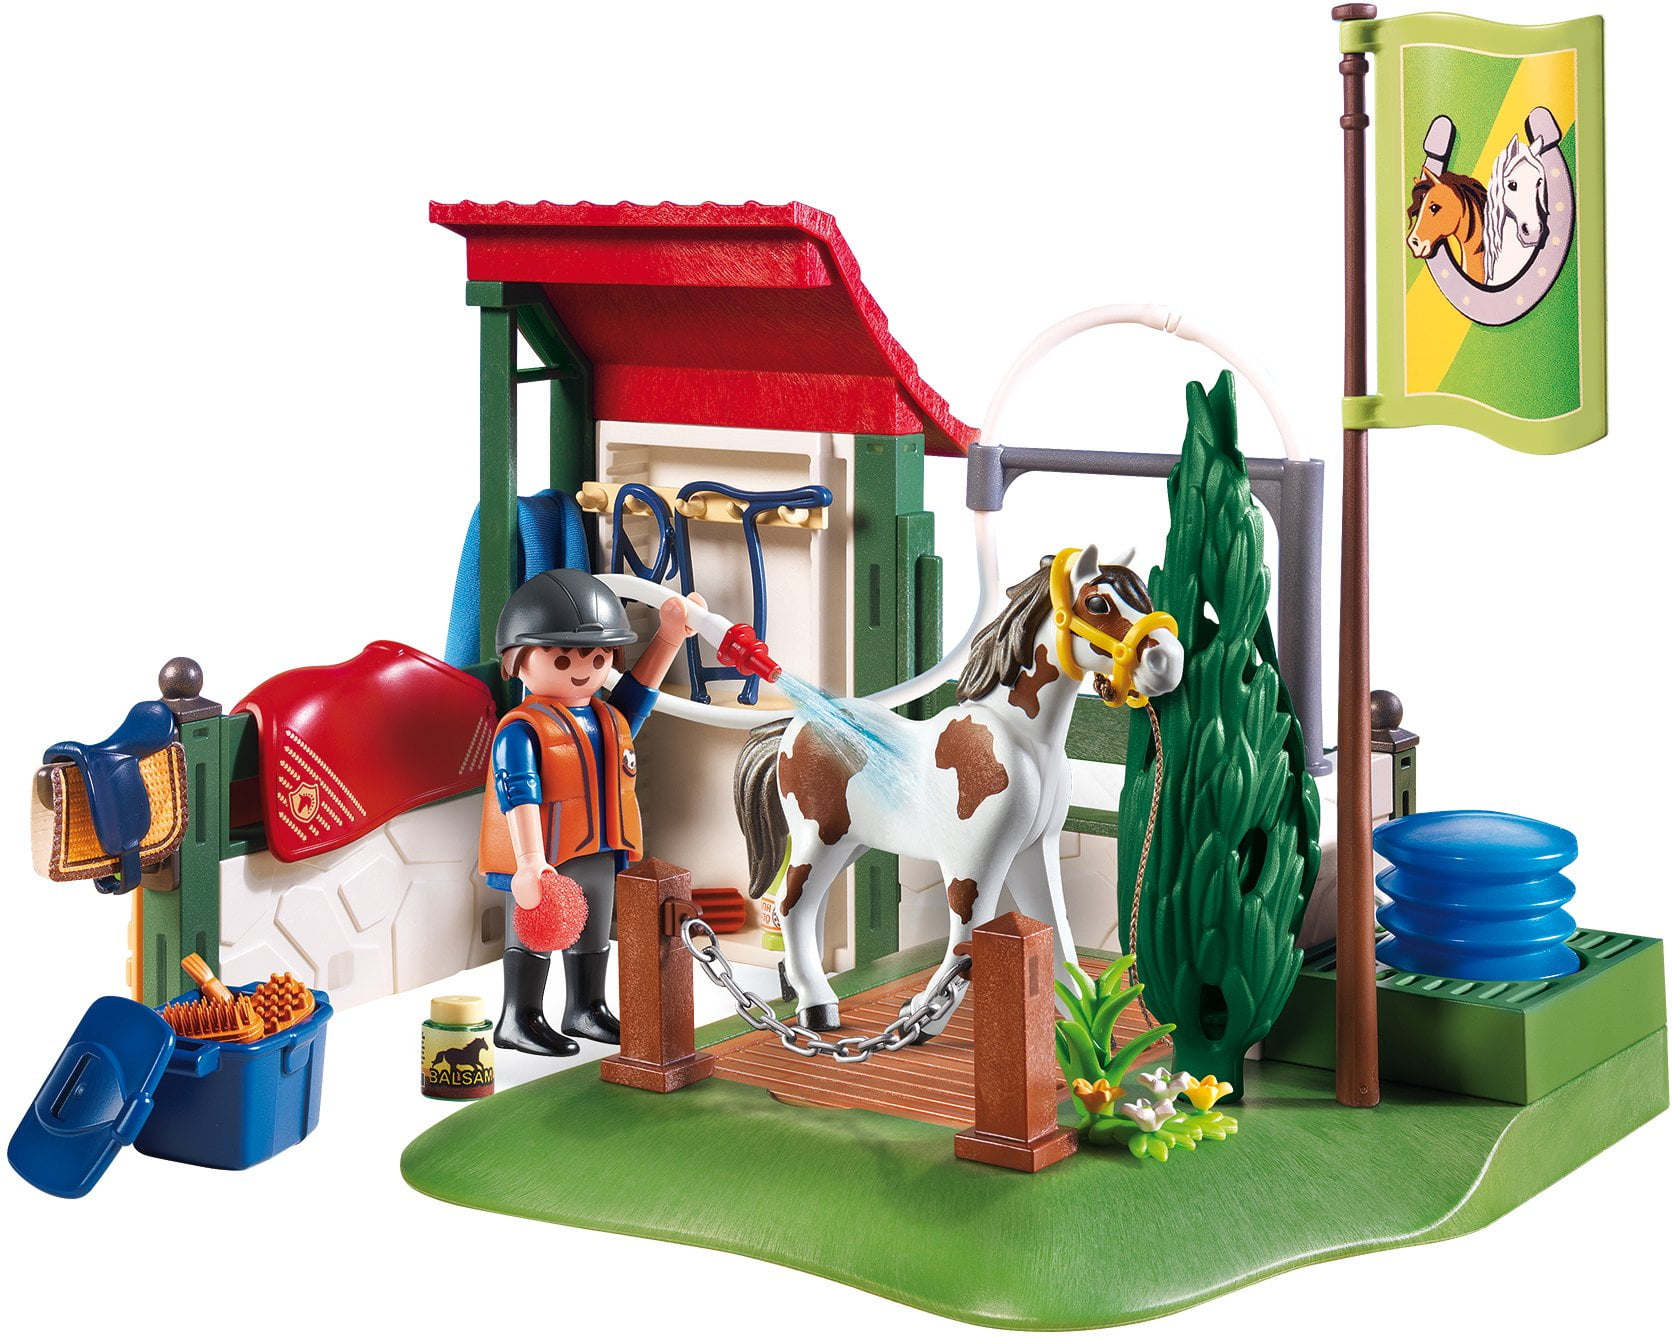 Playmobil bar for jumping horse riding sport journey